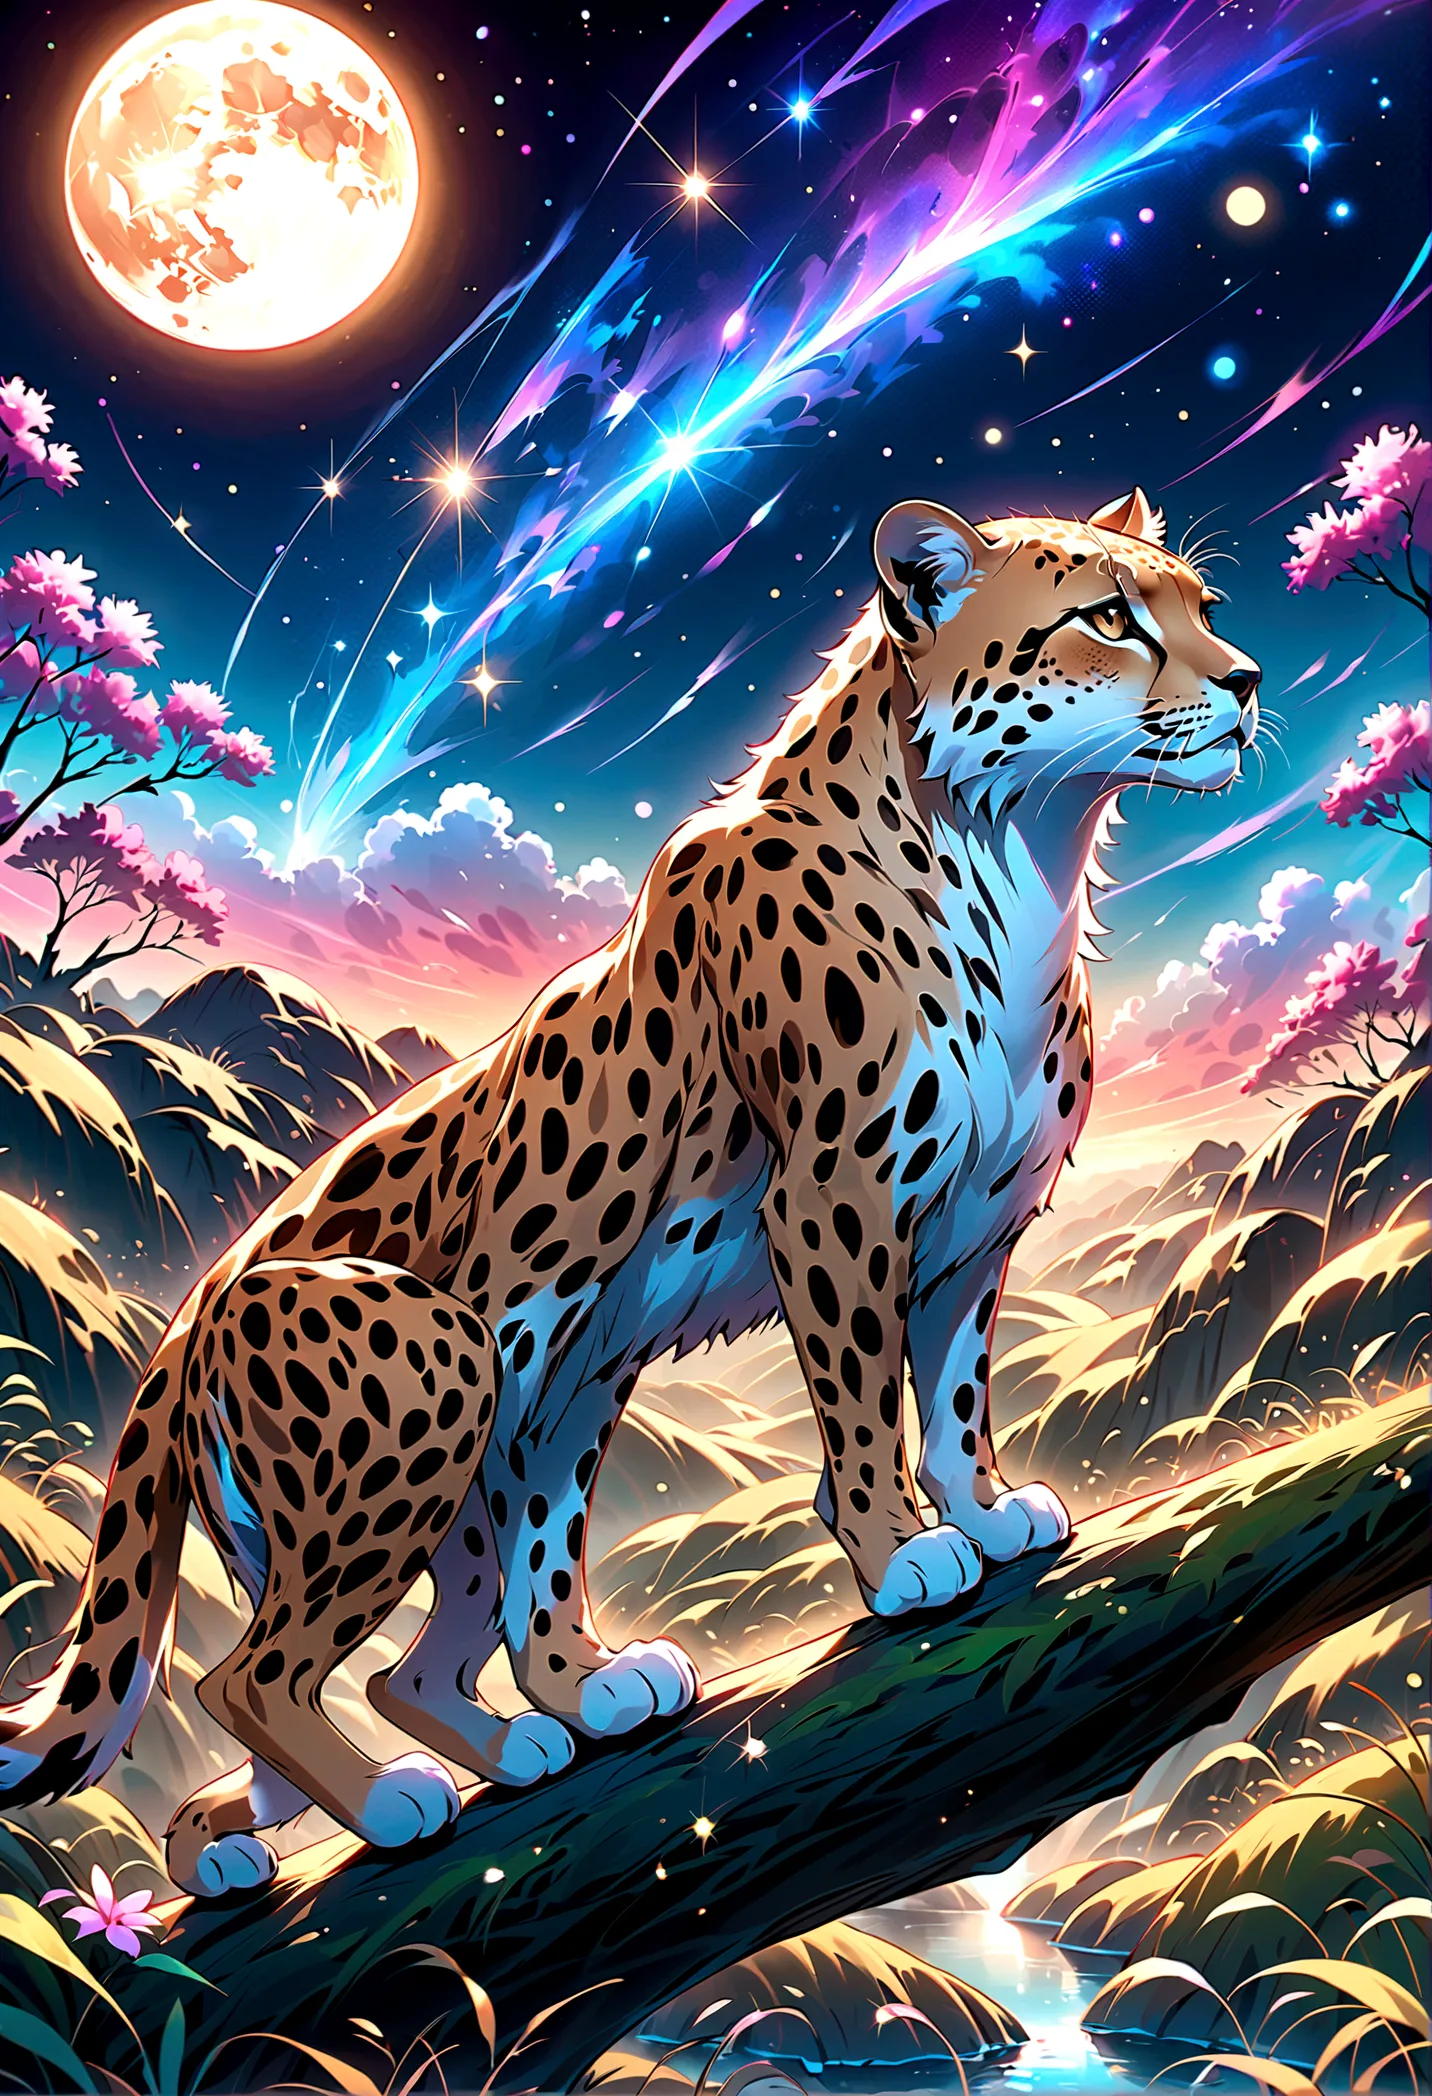 ((Draw a night savannah landscape)),A cheetah looking up at the sky,This is a scene that rose from the depths of sadness and des...